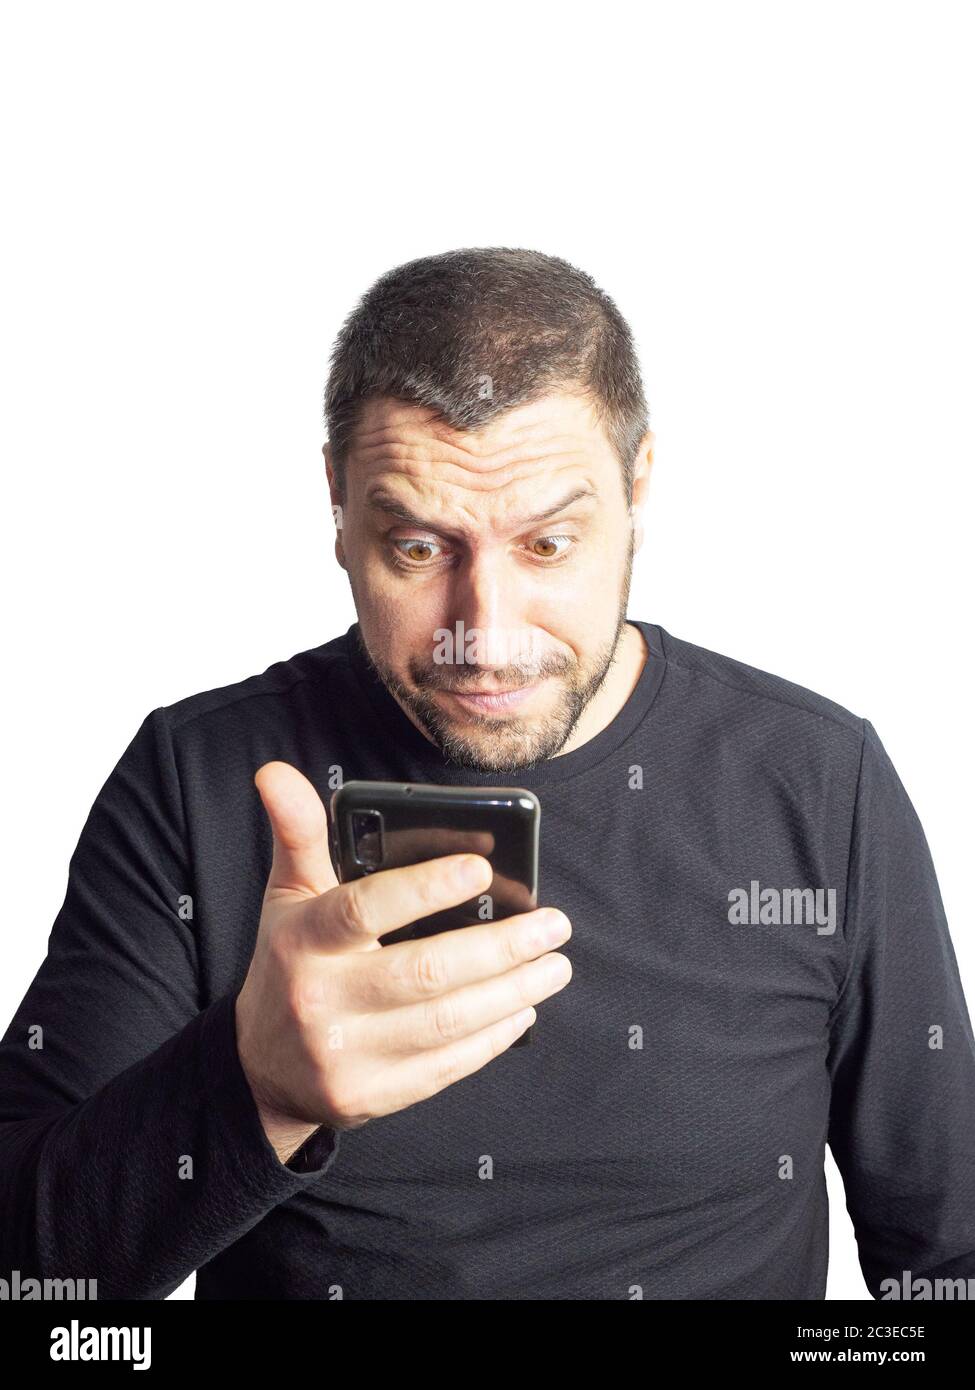 A man with a beard and in a black sweater looks at the phone with his eyebrows raised and his eyes bulging. Stock Photo